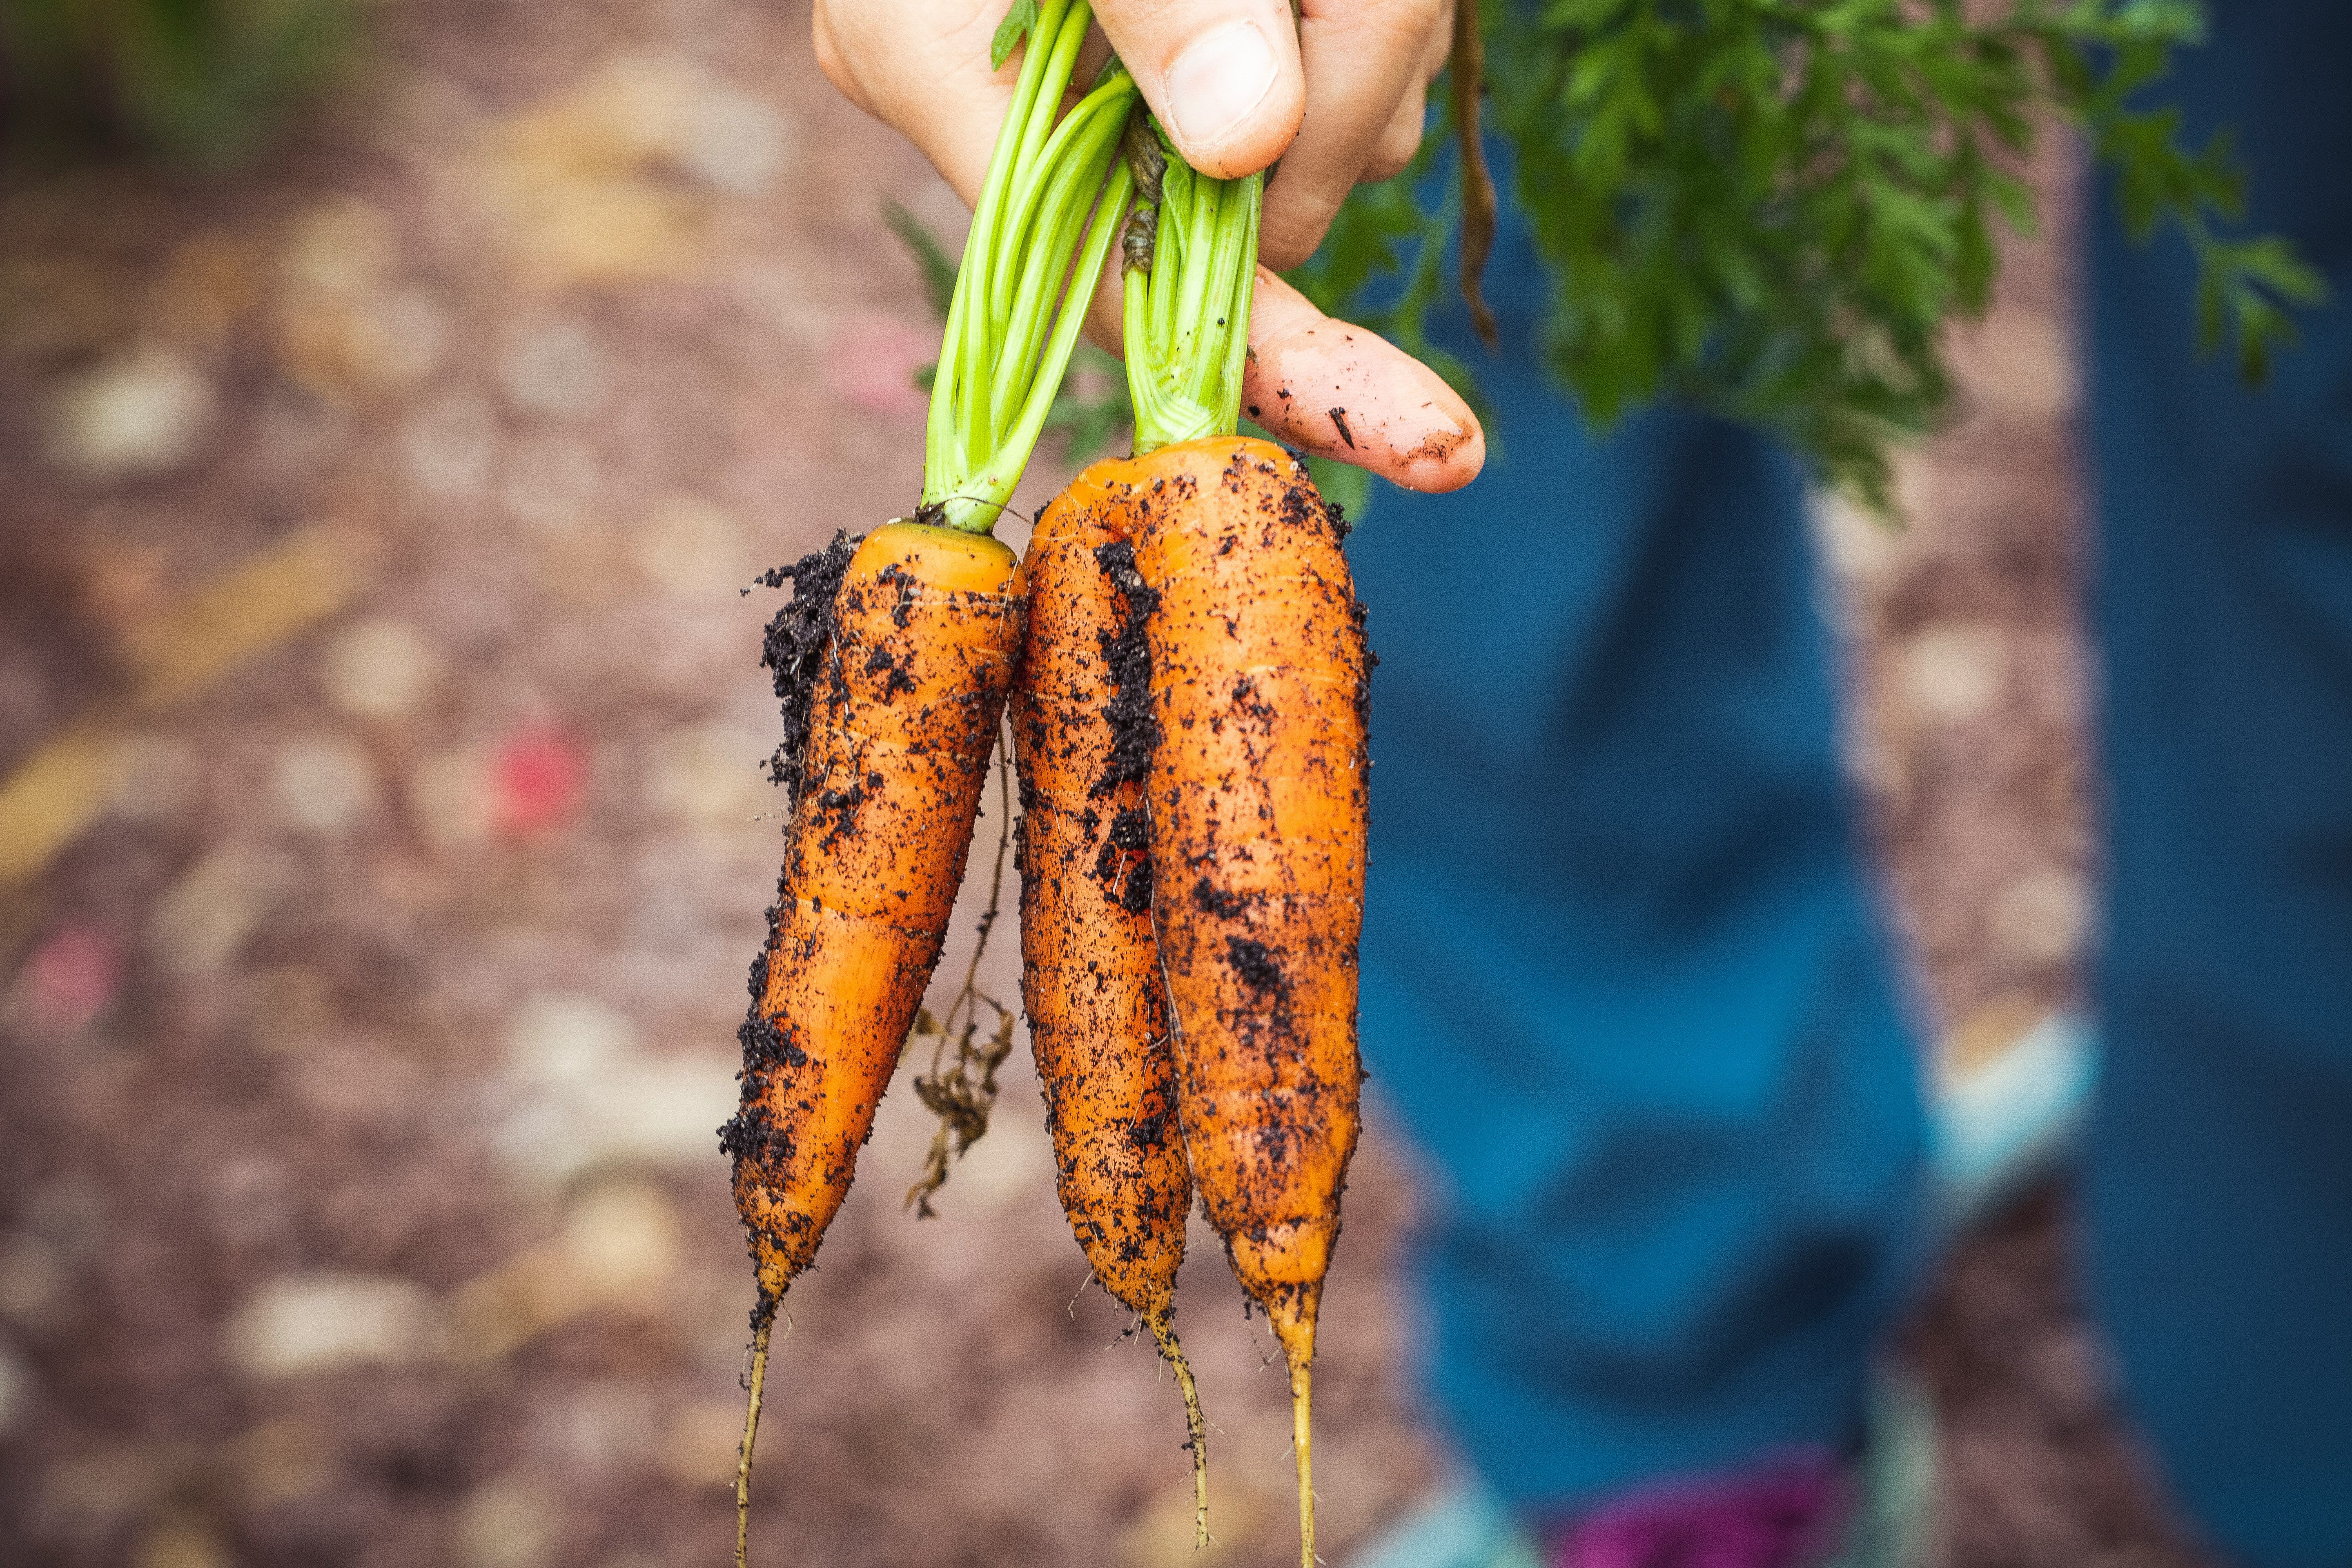 Carrots are excellent companion plants for tomatoes.